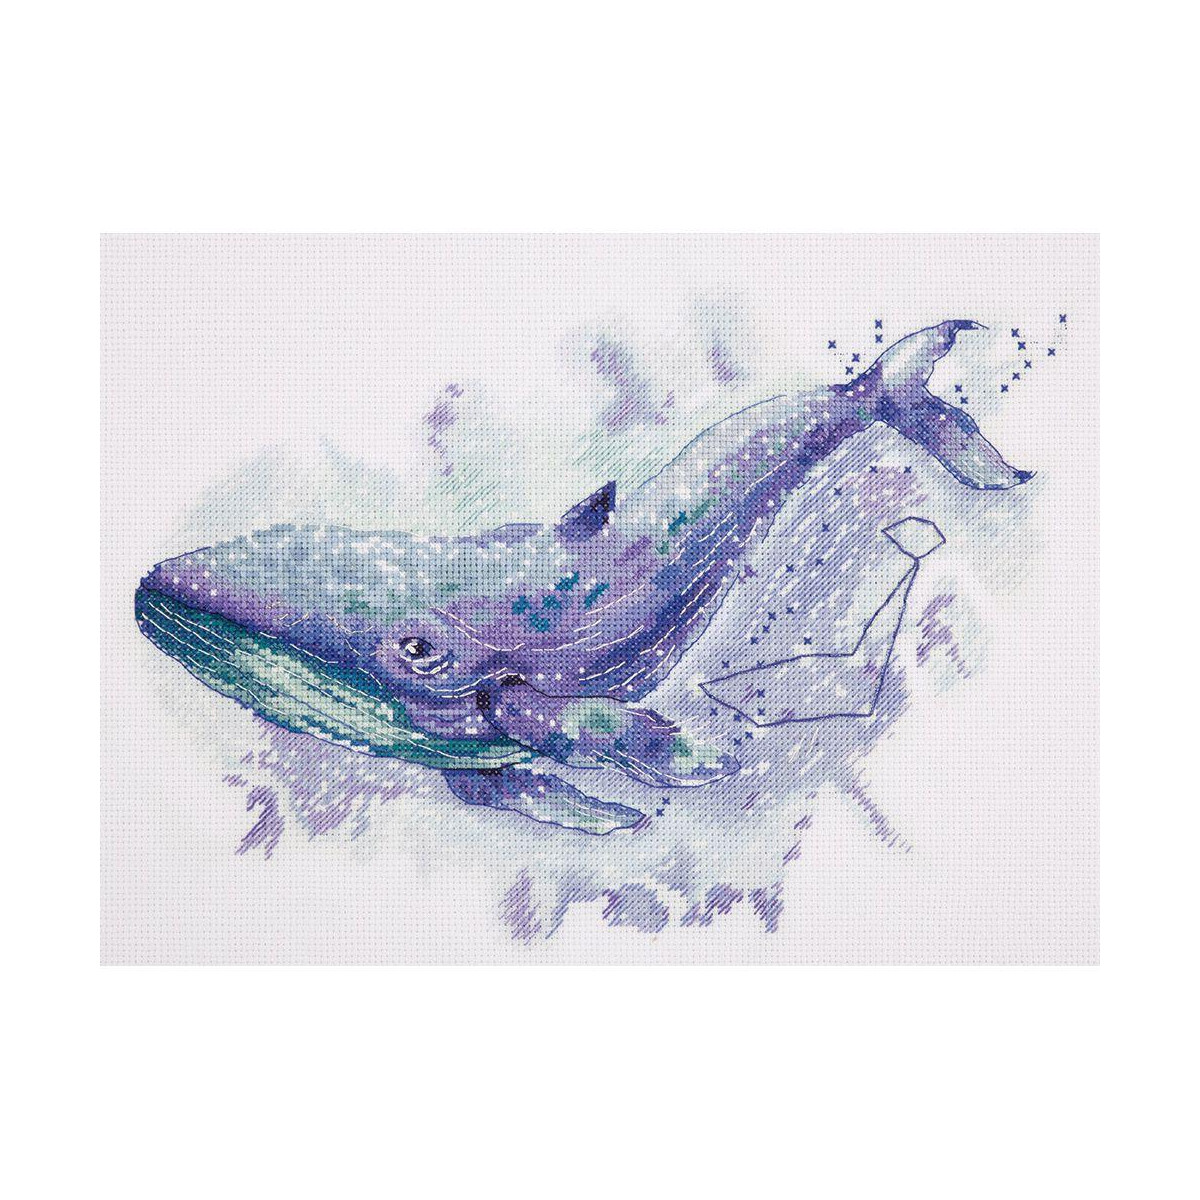 Panna counted cross stitch kit "The Whale...